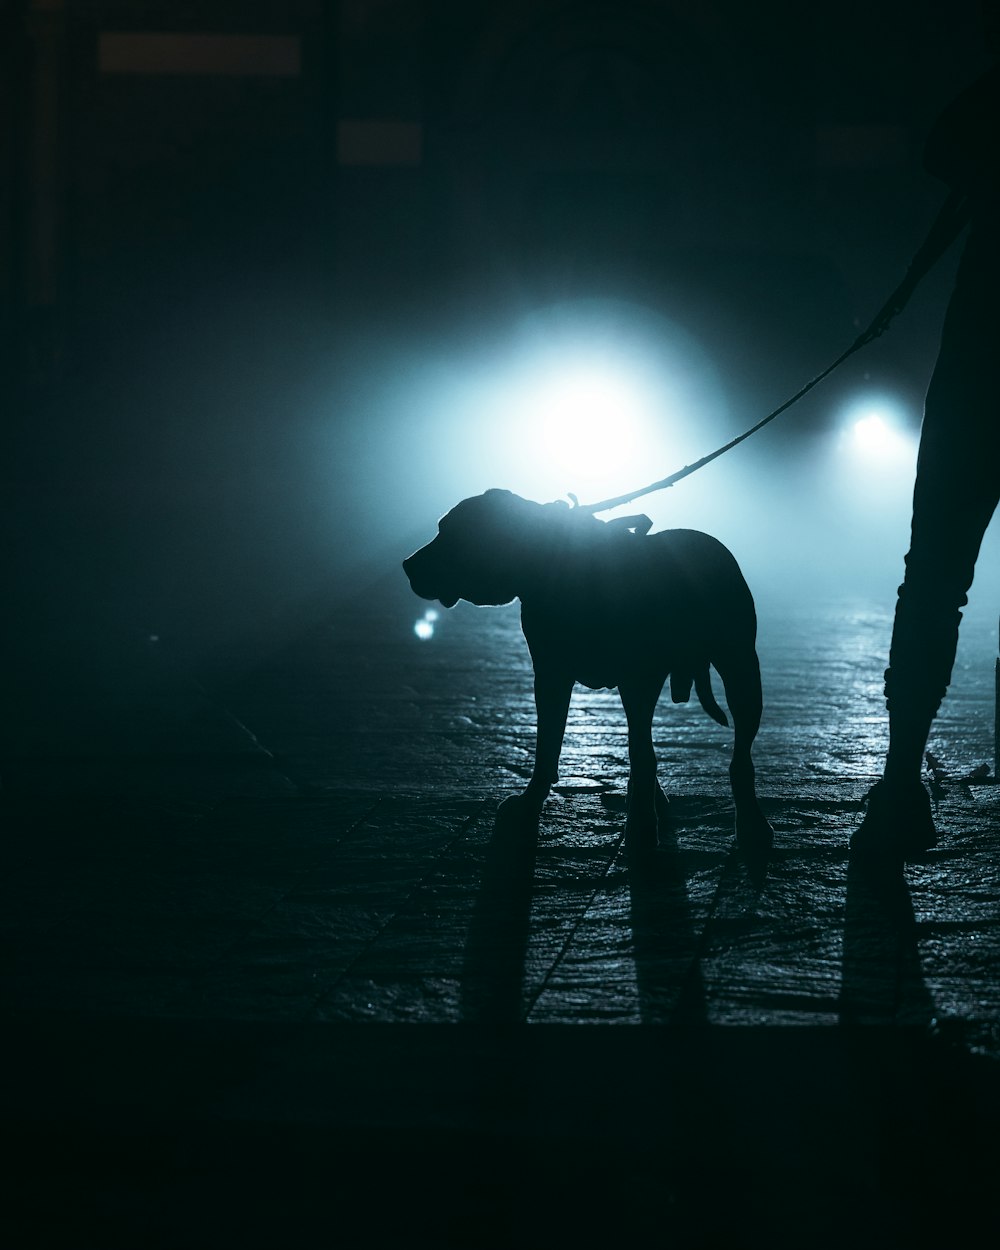 a person walking a dog on a leash in the dark